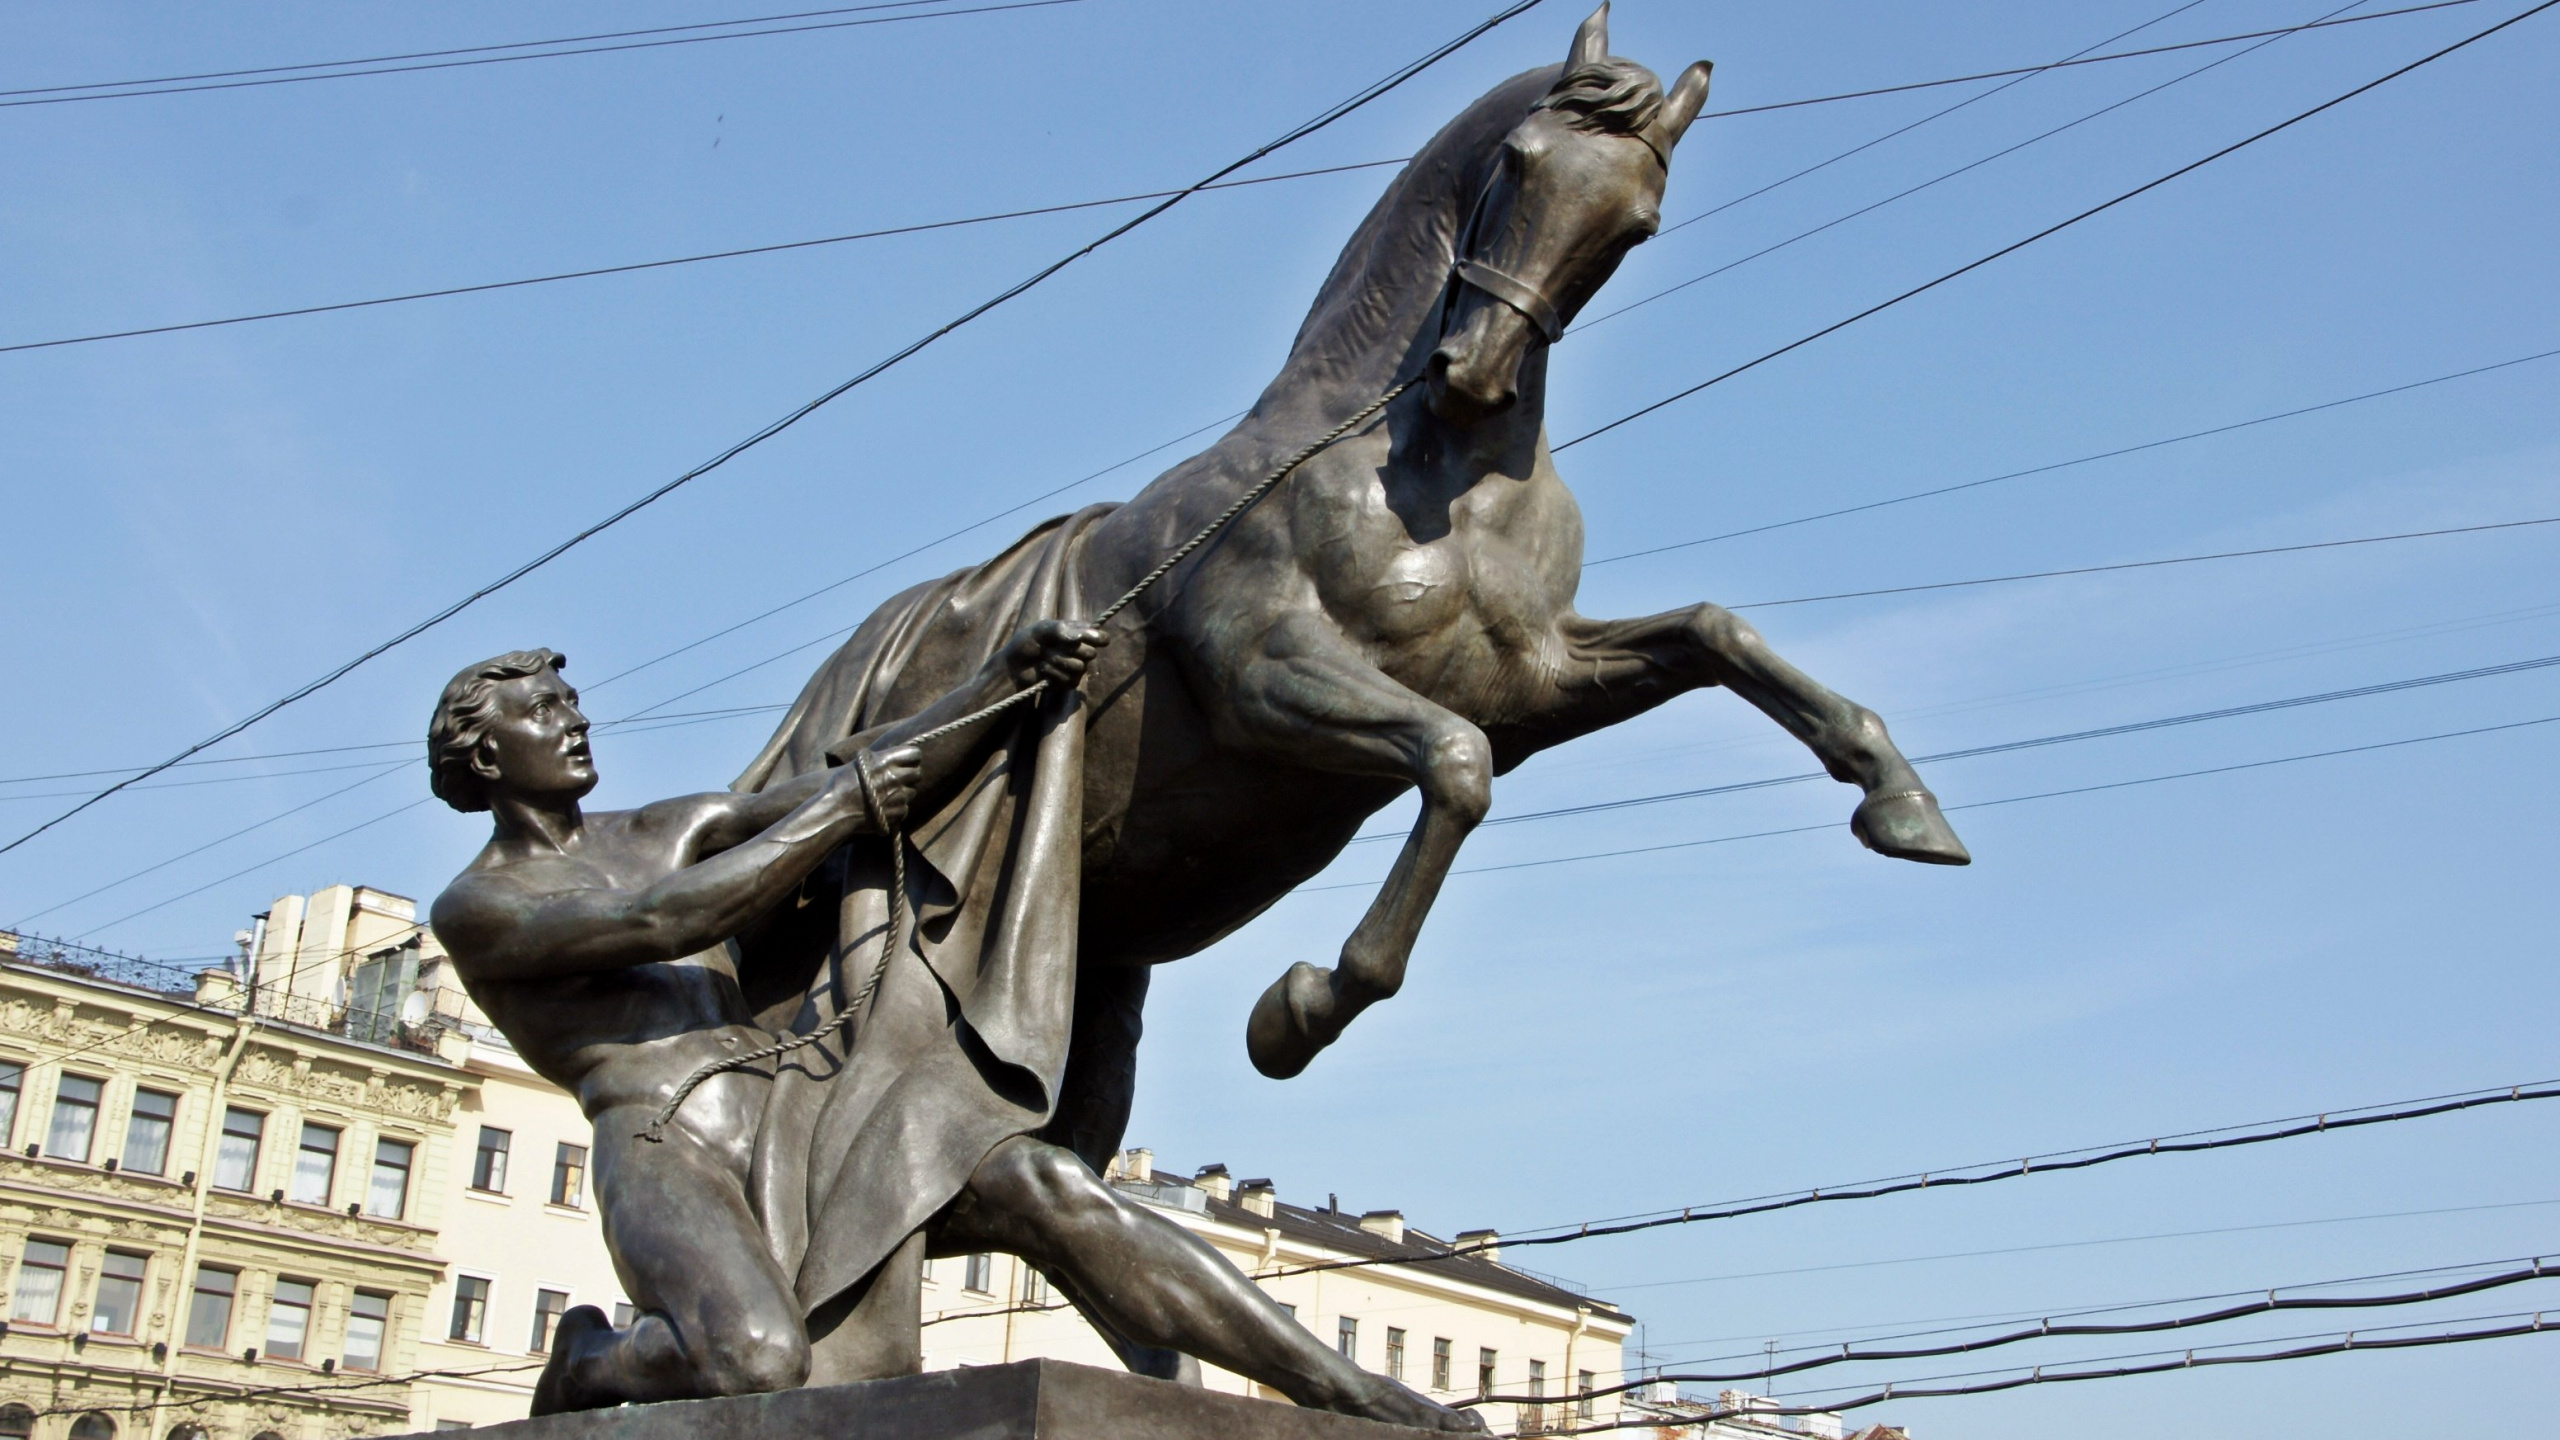 Man Riding Horse Statue Under Blue Sky During Daytime. Wallpaper in 2560x1440 Resolution